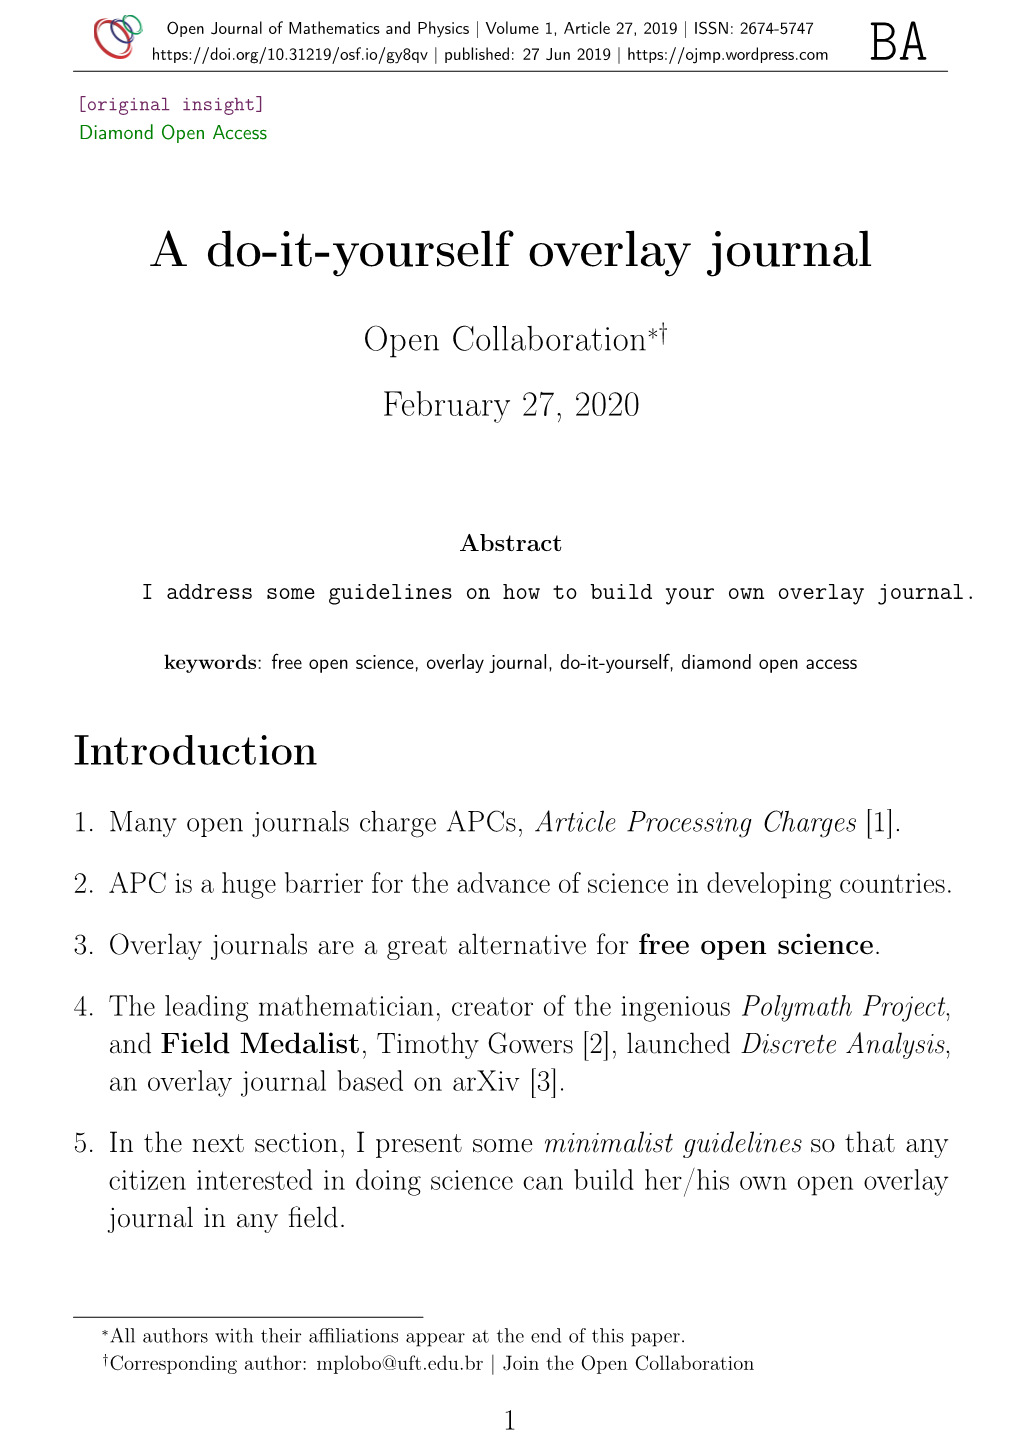 A Do-It-Yourself Overlay Journal